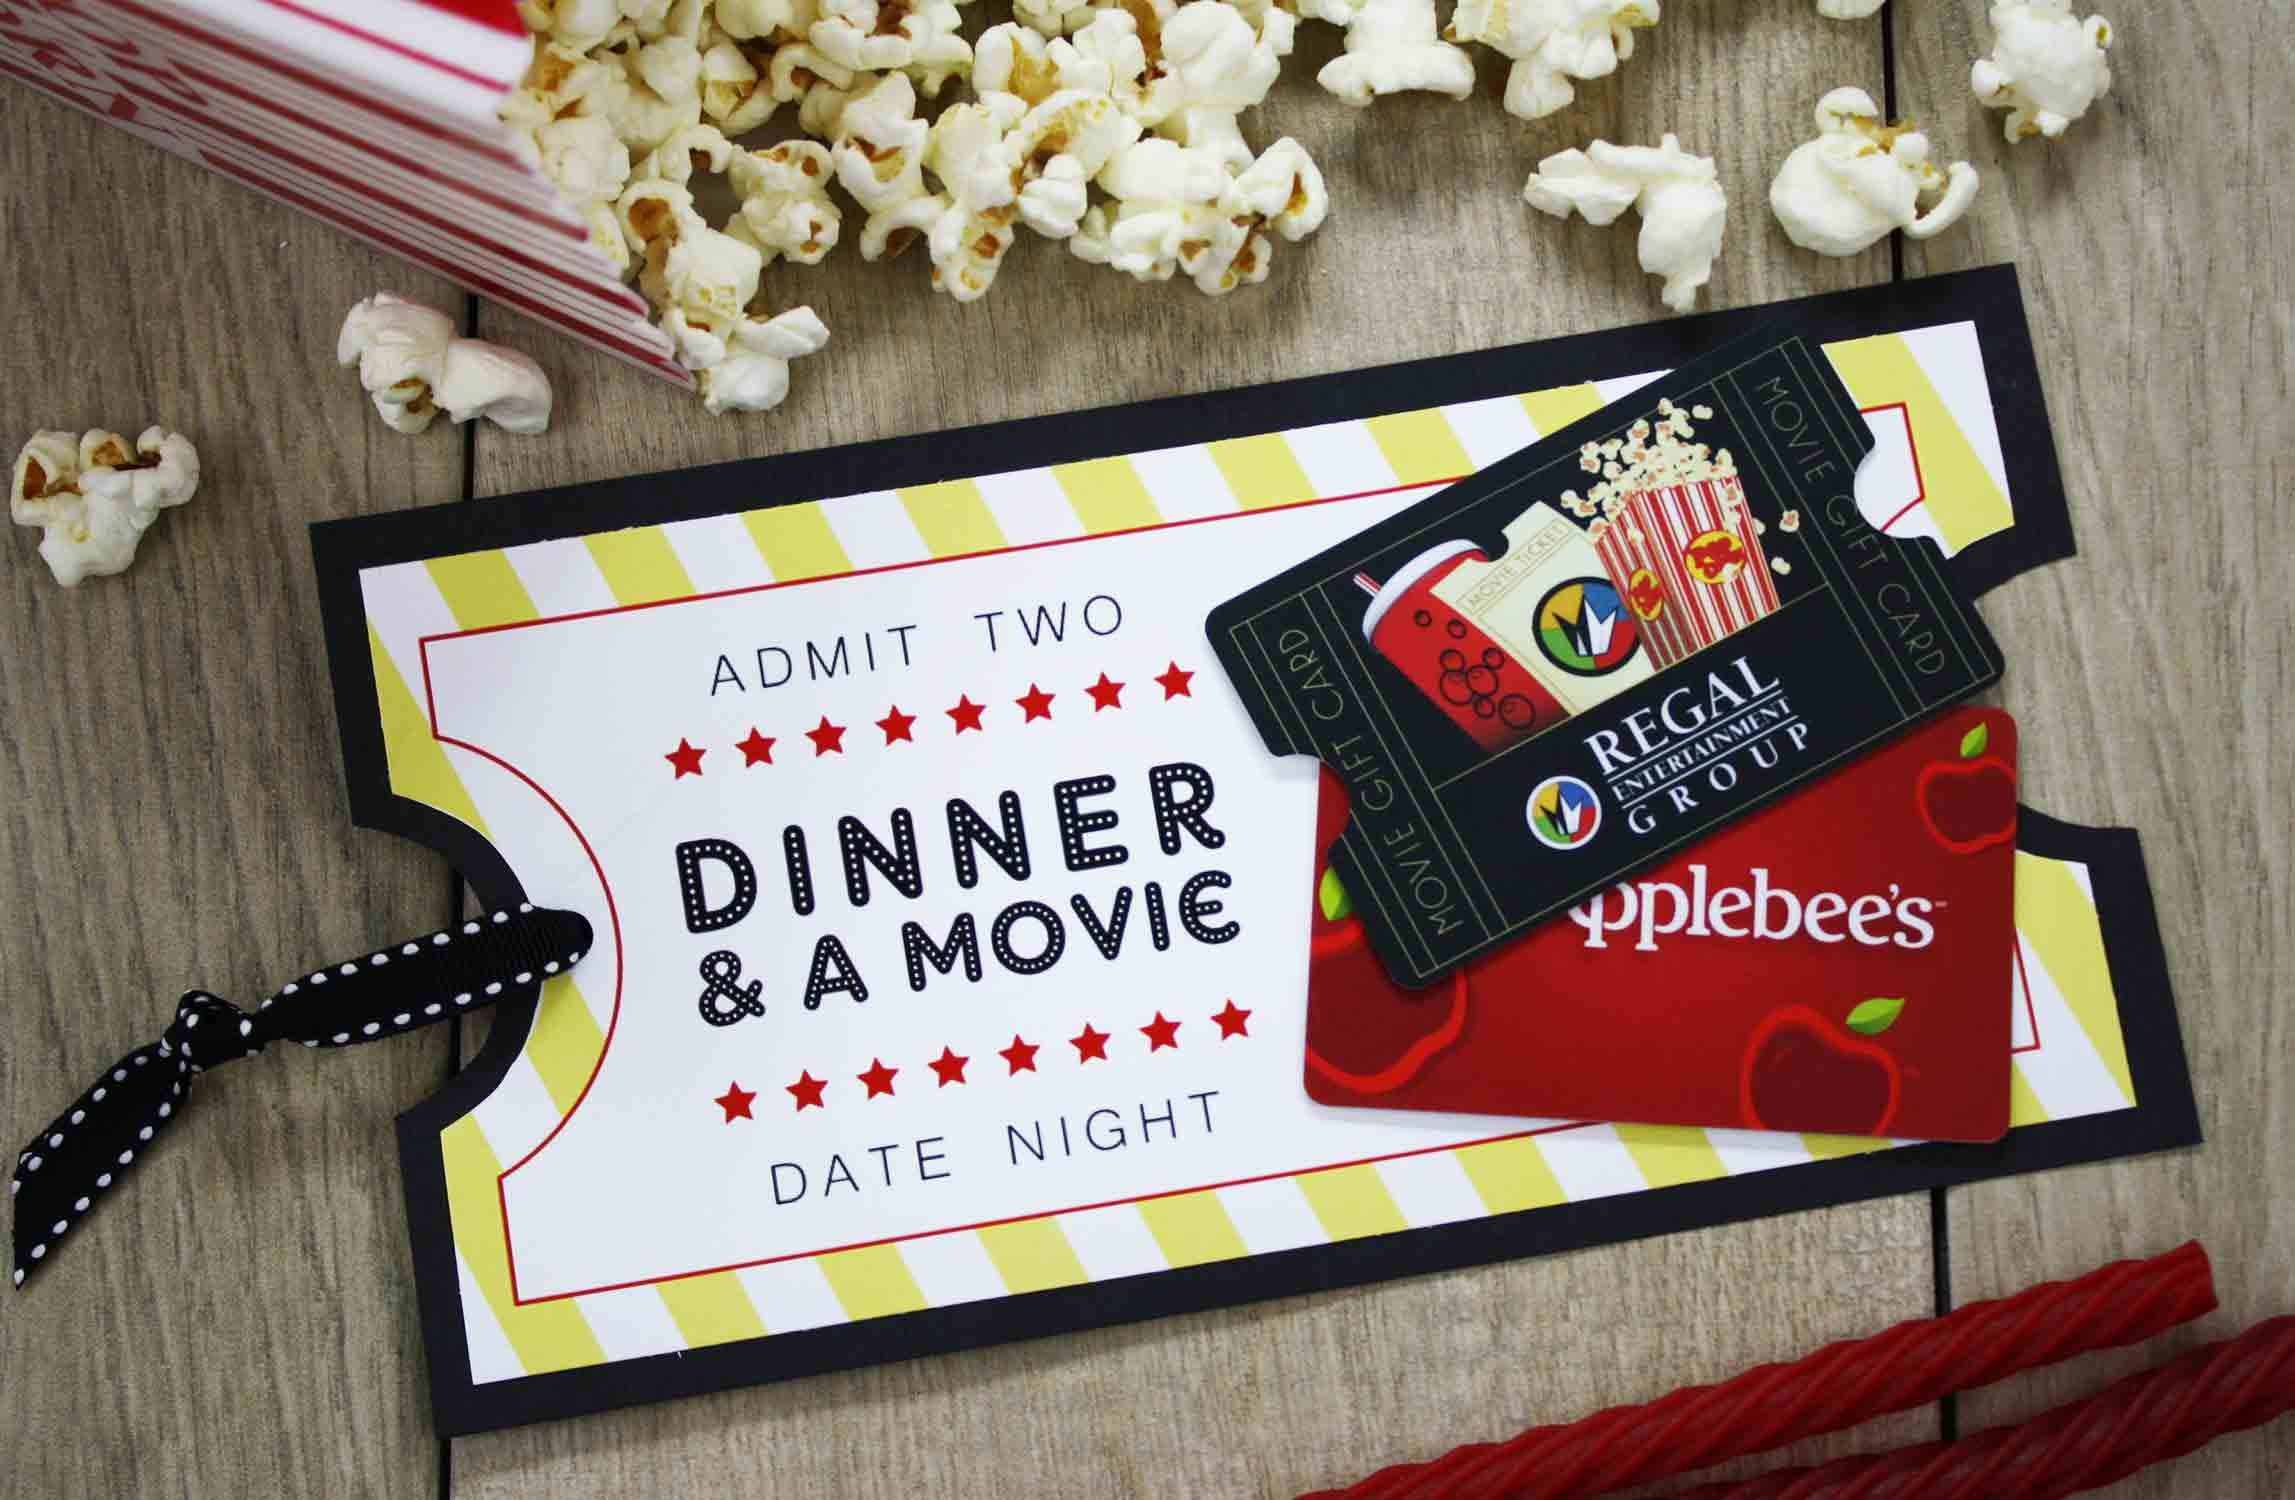 Movie Date Night Gift Basket Ideas
 Free Printable Give DATE NIGHT for a Wedding Gift